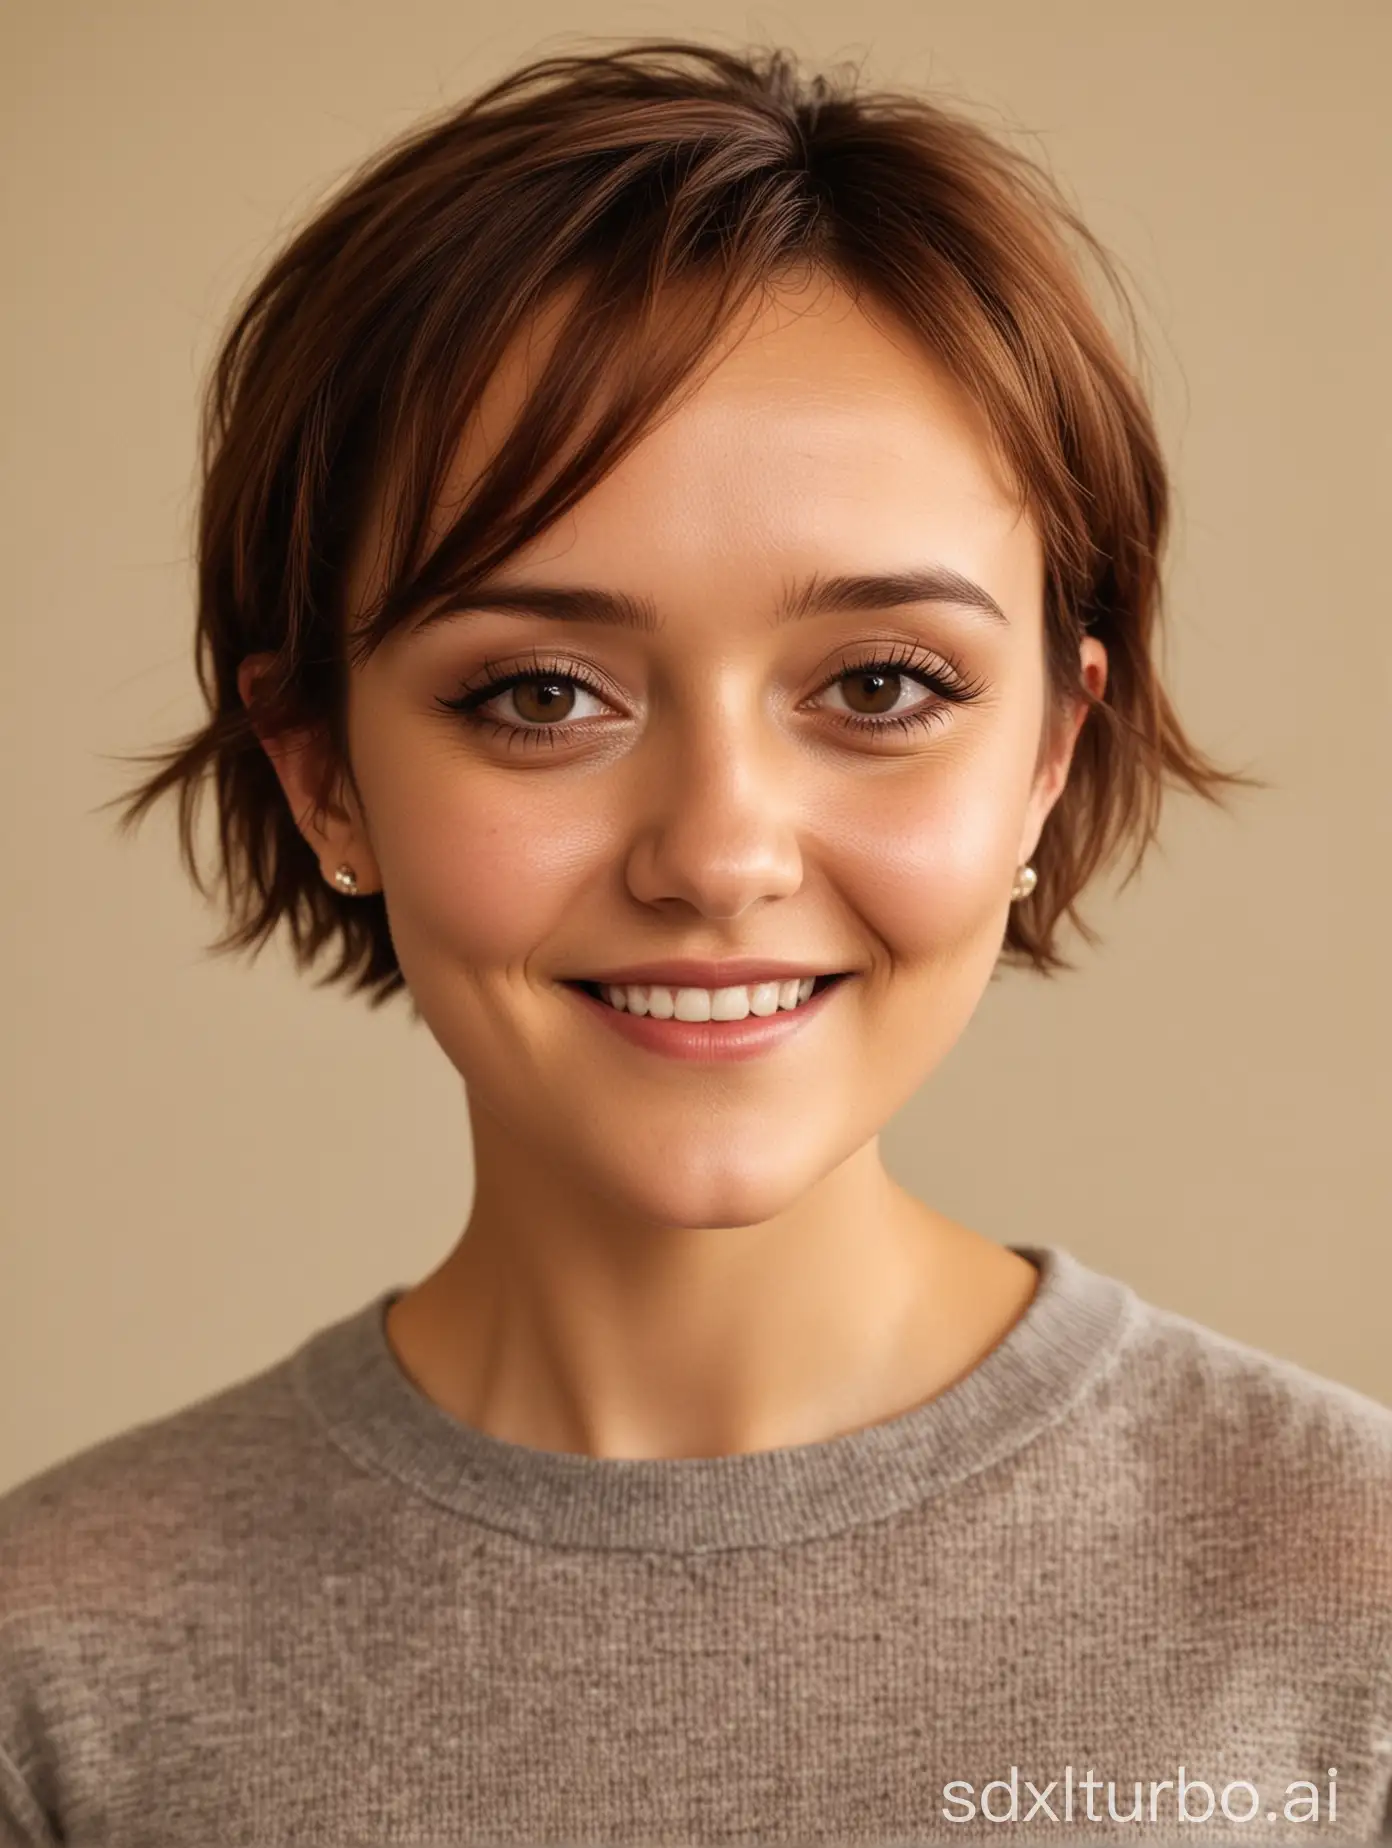 Actress-Olivia-Cooke-Posing-with-Short-Haircut-and-Radiant-Smile